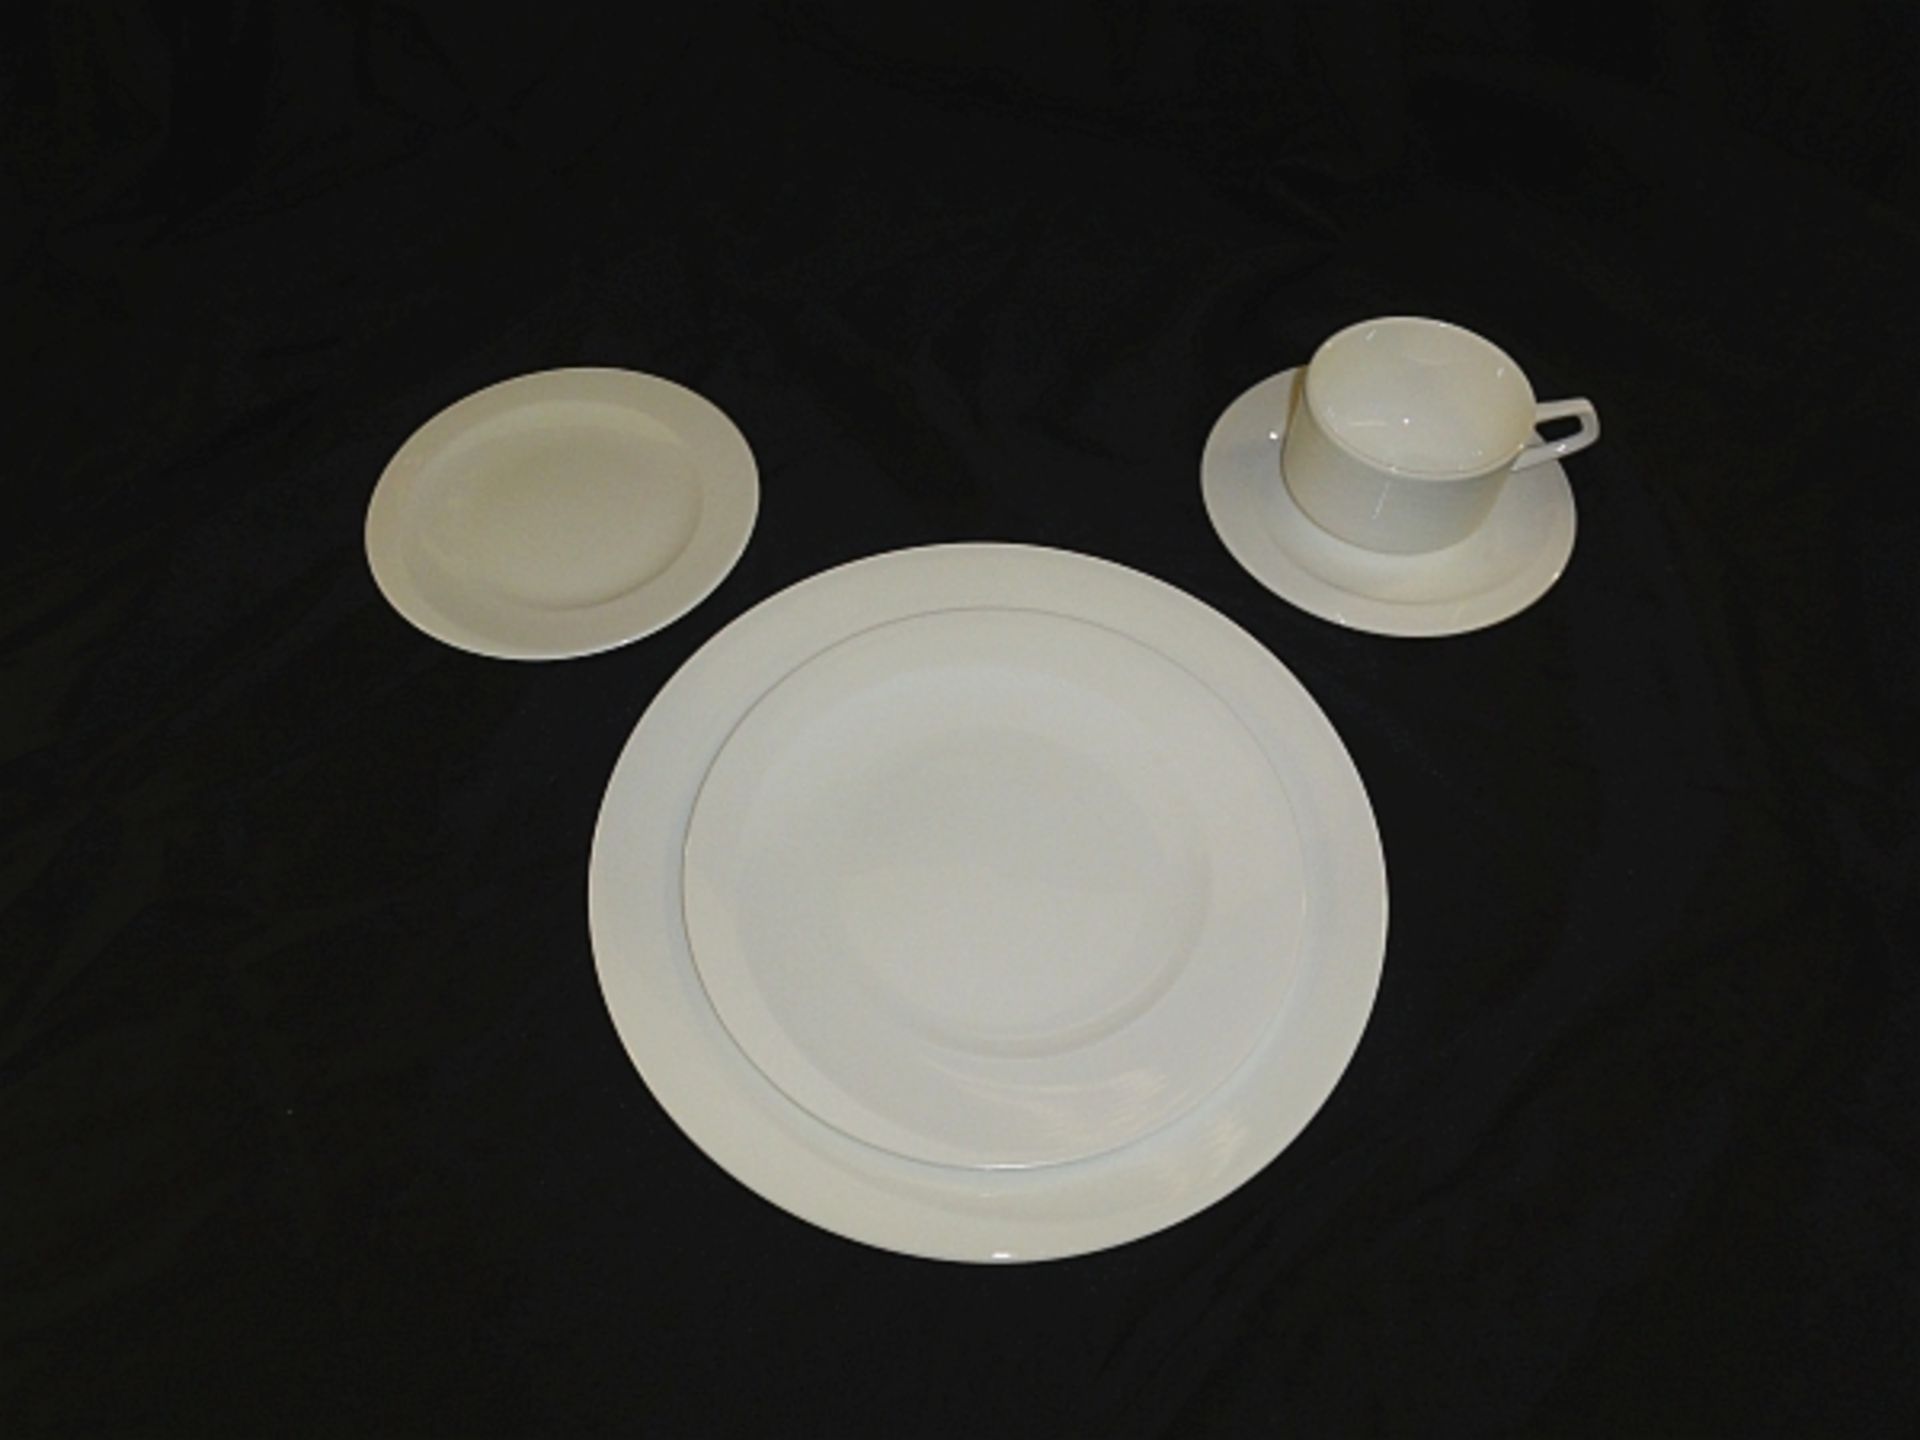 LOT OF 116 WHITE COFFEE SAUCER- FORTESSA- LOT COMES IN 5 MICROWIRE CRATES BILLED @ $18 EA. - Image 2 of 2